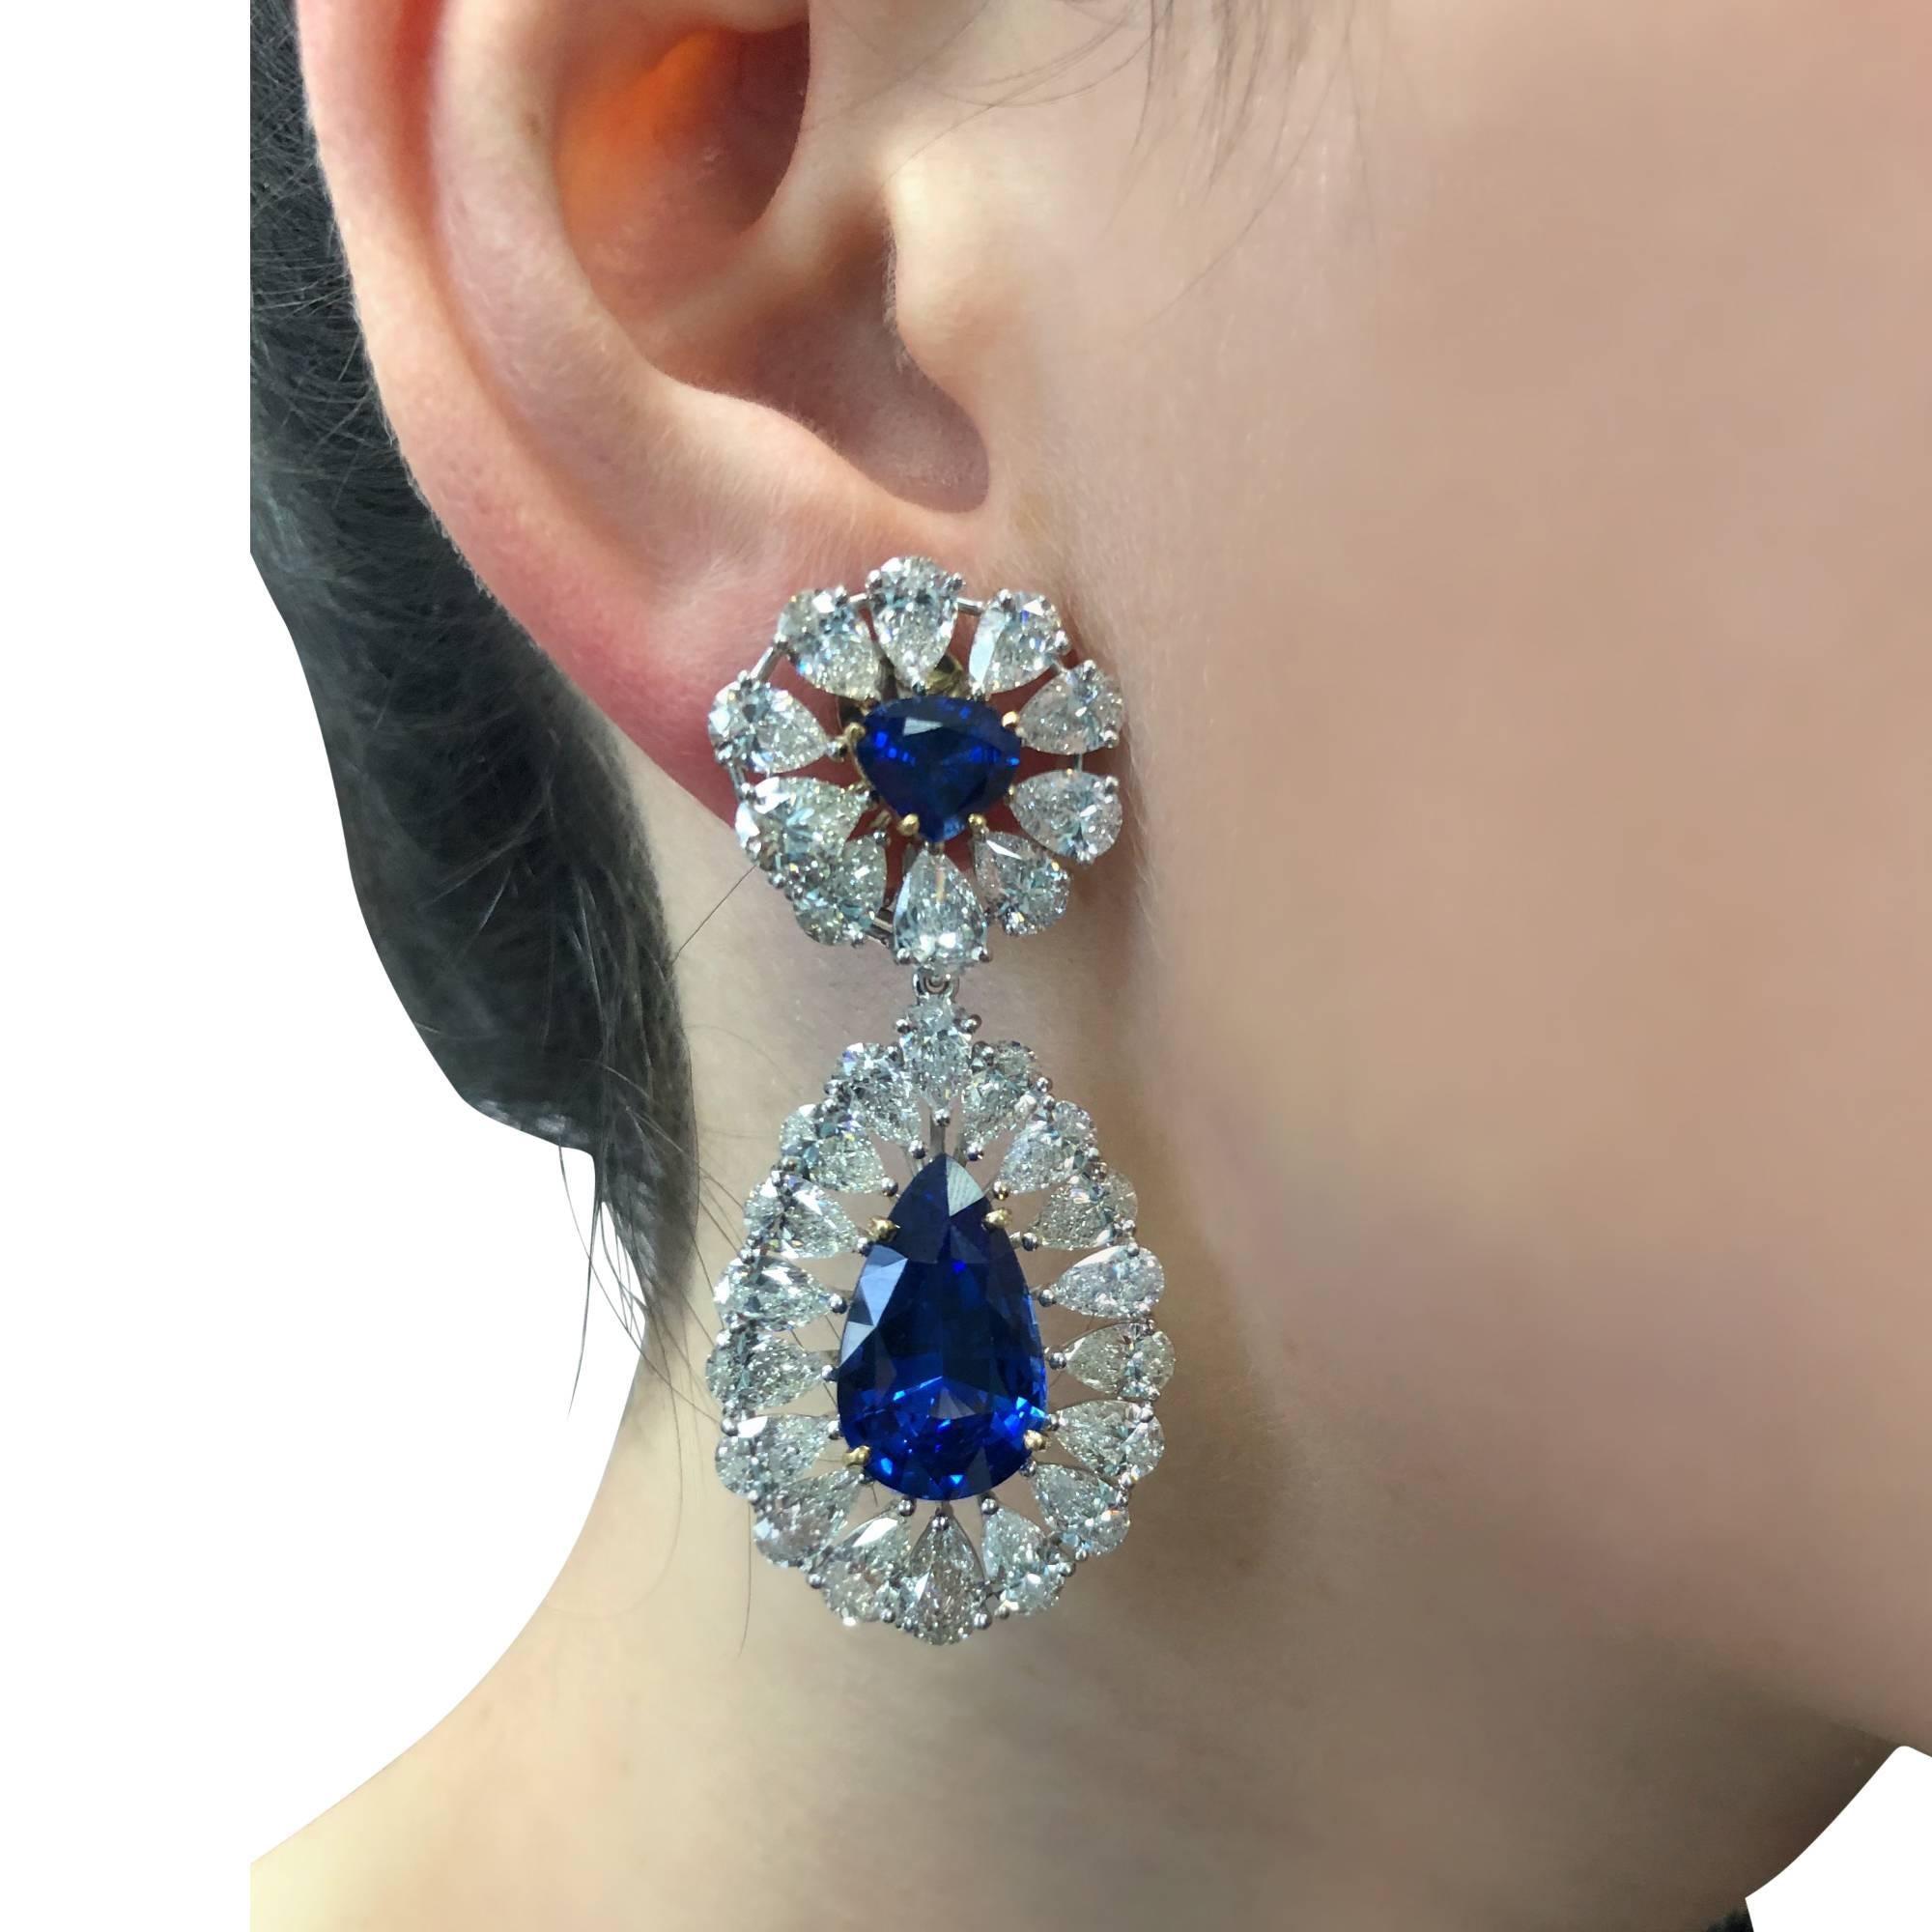 Spectacular day and night earrings featuring 2 perfectly matched vibrant blue pear shape AGL graded heated sapphires weighing approximately 16cts, suspended from 2 triangular cut sapphires weighing approximately 3cts, all surrounded by 56 pear shape